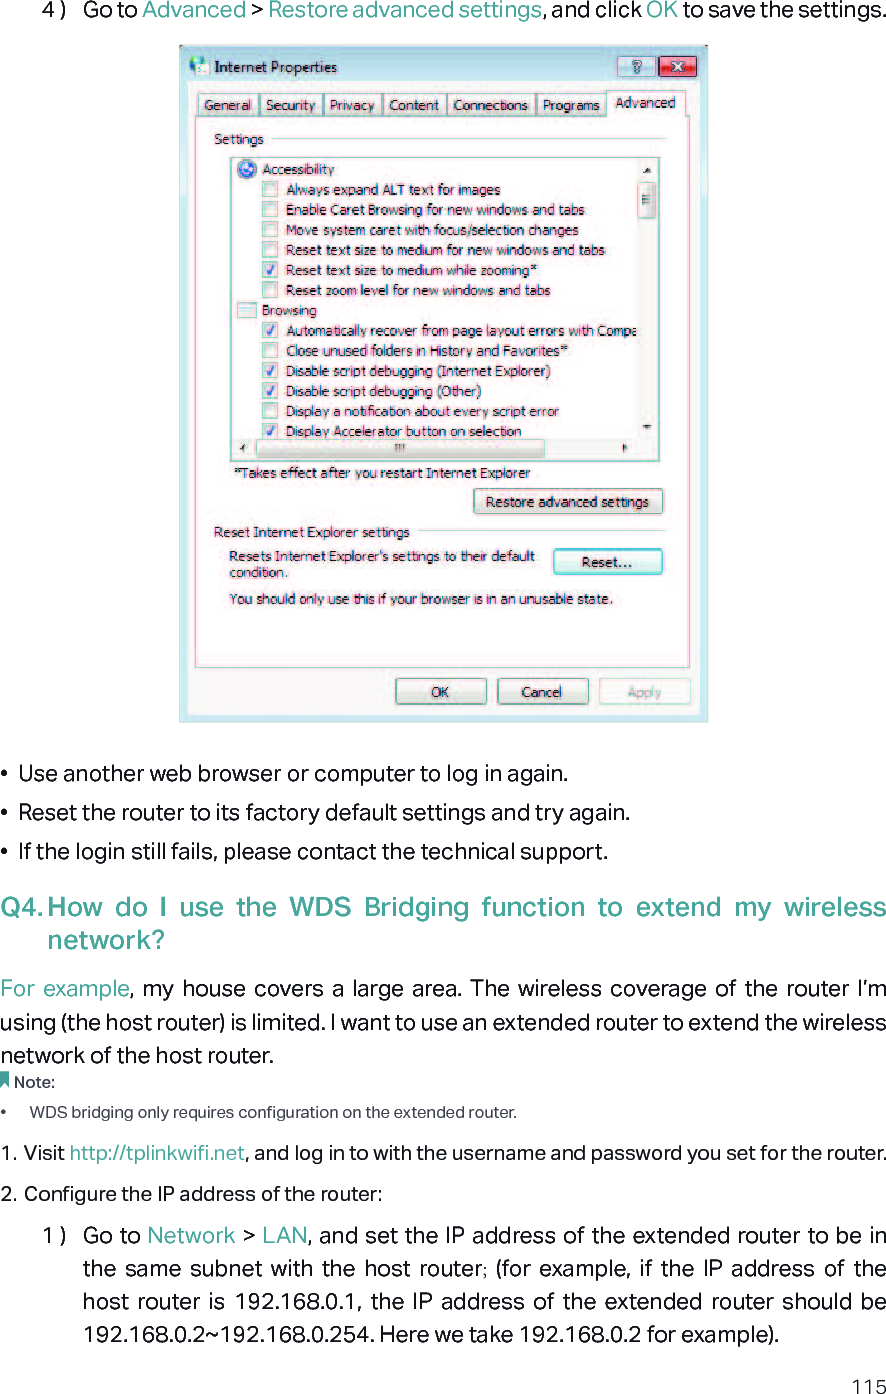 1154 )  Go to Advanced &gt; Restore advanced settings, and click OK to save the settings.•  Use another web browser or computer to log in again.•  Reset the router to its factory default settings and try again. •  If the login still fails, please contact the technical support.Q4. How  do  I  use  the  WDS  Bridging  function  to  extend  my  wireless network?For example, my  house  covers  a  large  area.  The  wireless coverage  of  the  router  I’m using (the host router) is limited. I want to use an extended router to extend the wireless network of the host router.Note:•  WDS bridging only requires configuration on the extended router.1. Visit http://tplinkwifi.net, and log in to with the username and password you set for the router. 2. Configure the IP address of the router:1 )  Go to Network &gt; LAN, and set the IP address of the extended router to be in the  same  subnet  with  the  host  router;  (for  example,  if  the  IP  address  of  the host  router  is  192.168.0.1,  the  IP  address of  the  extended  router  should  be 192.168.0.2~192.168.0.254. Here we take 192.168.0.2 for example).